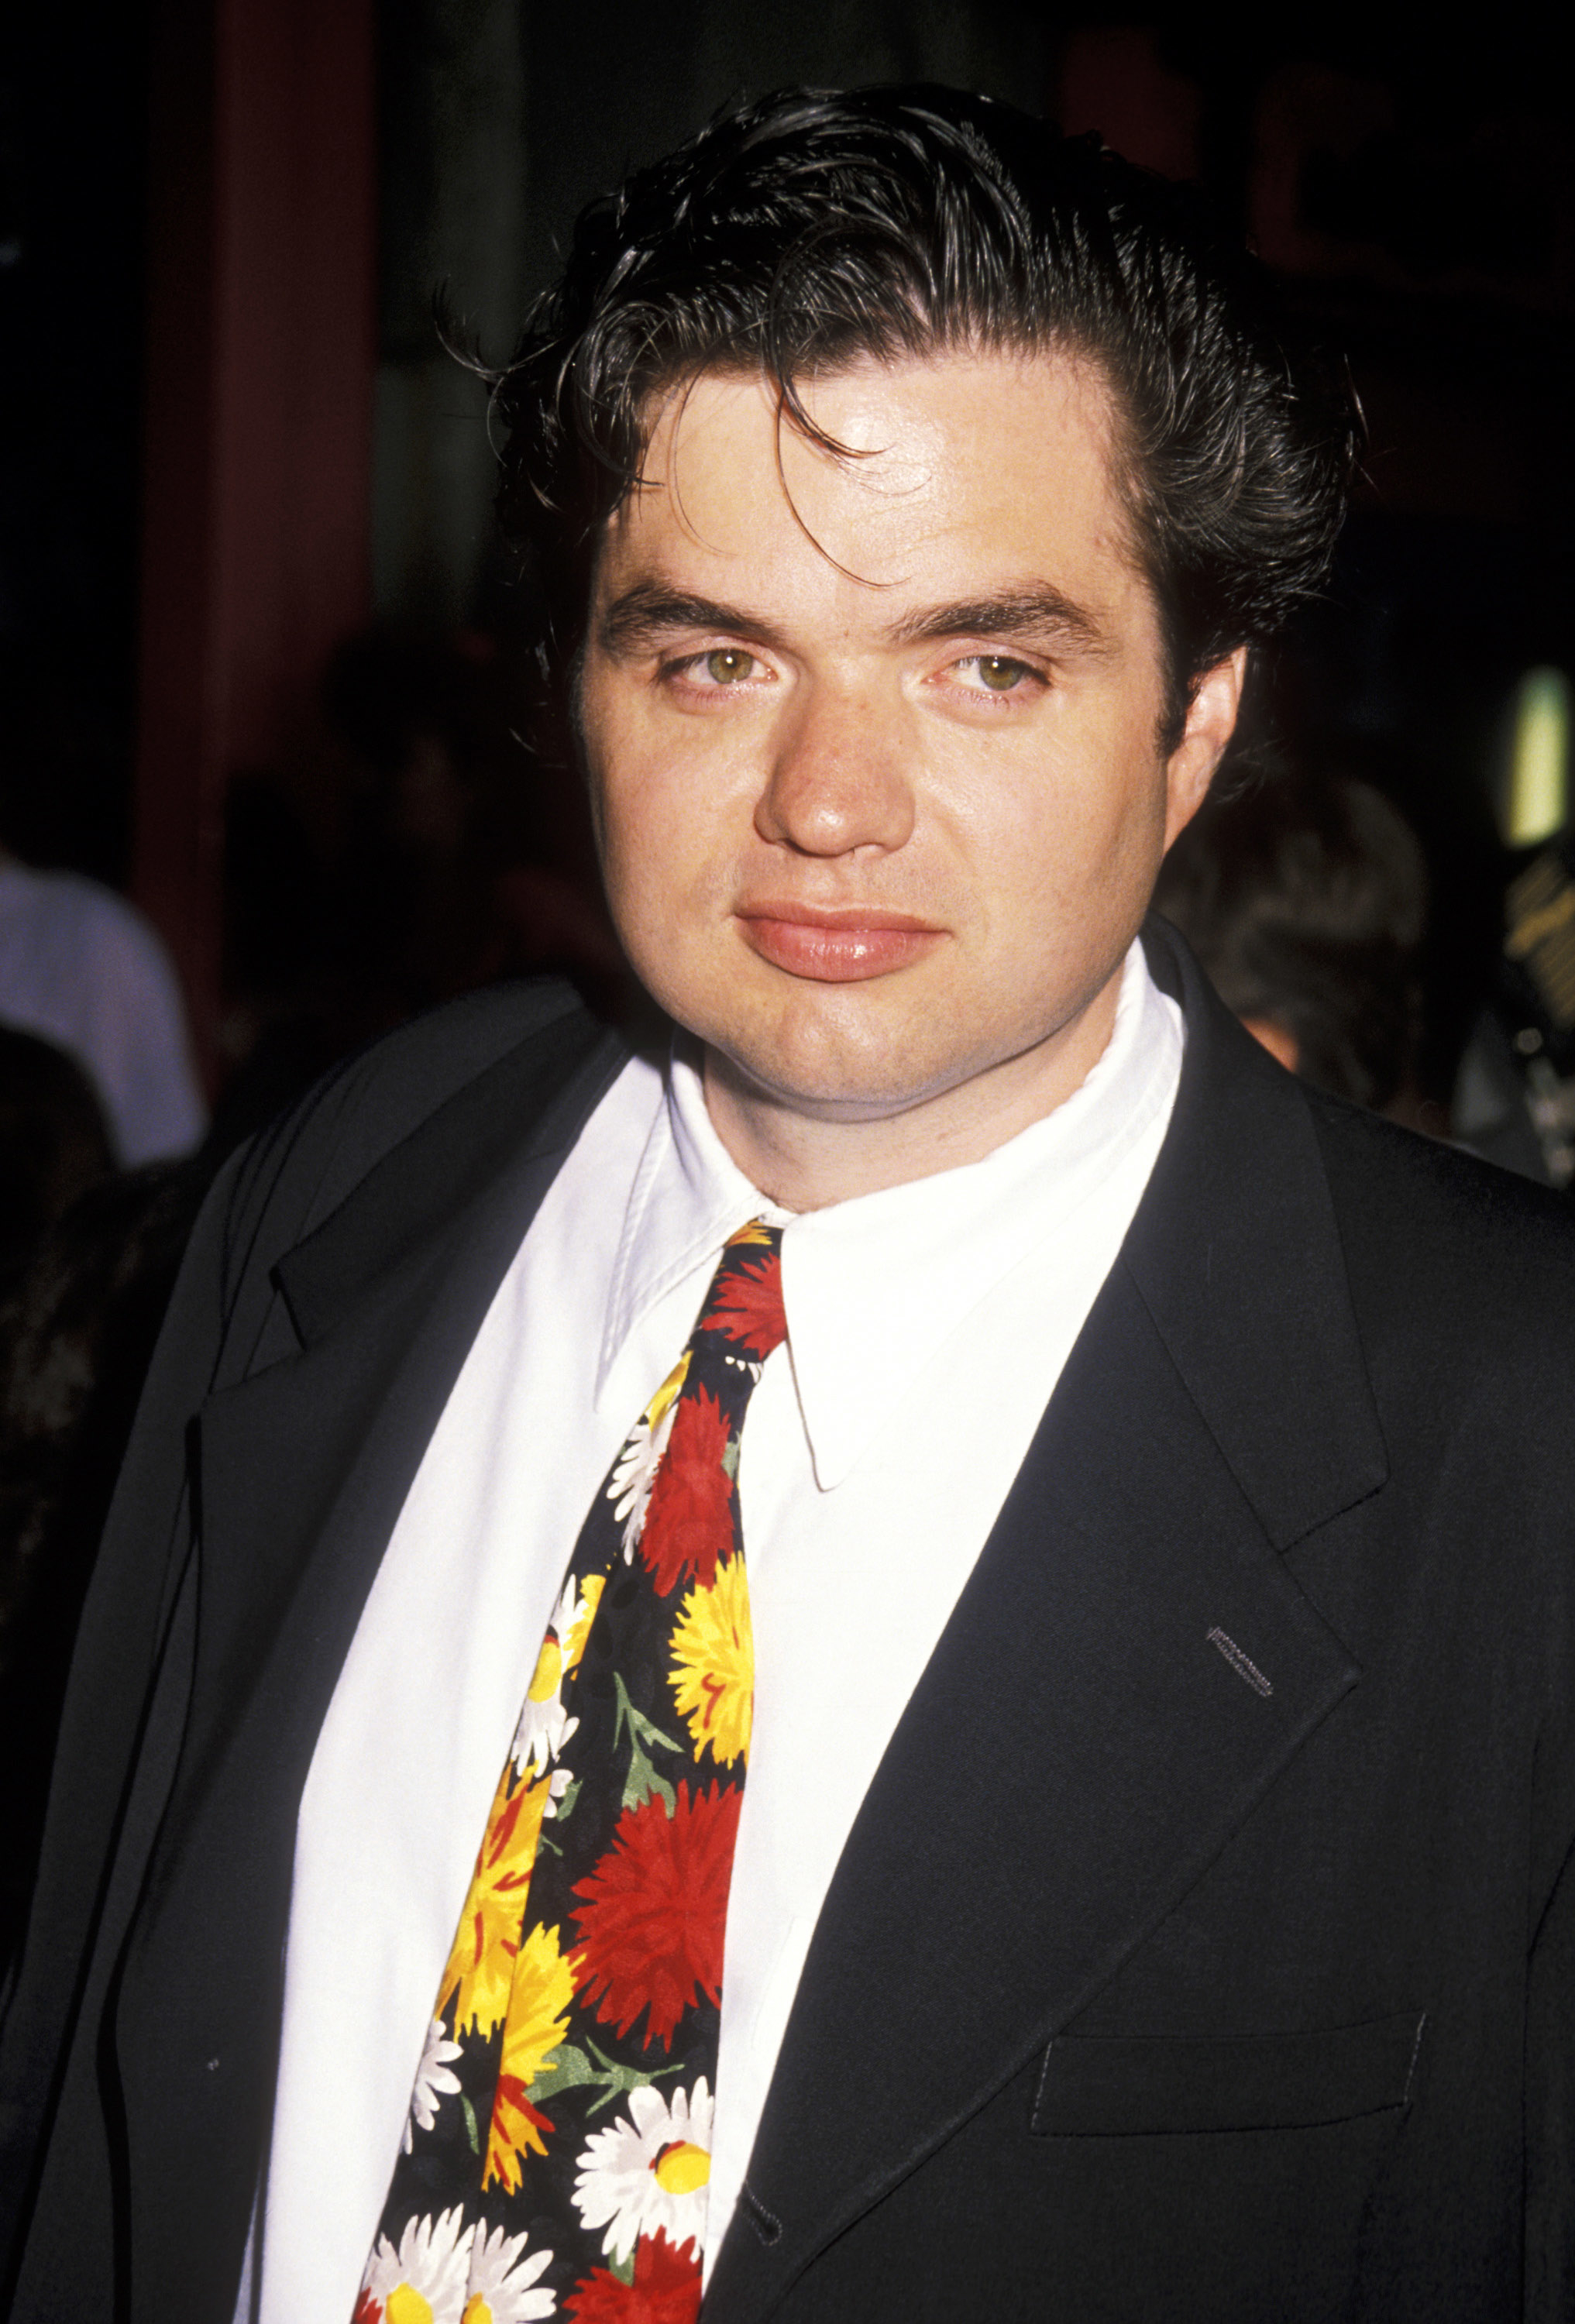 Oliver Platt at a premiere wearing a floral tie, suit jacket, and dress shirt